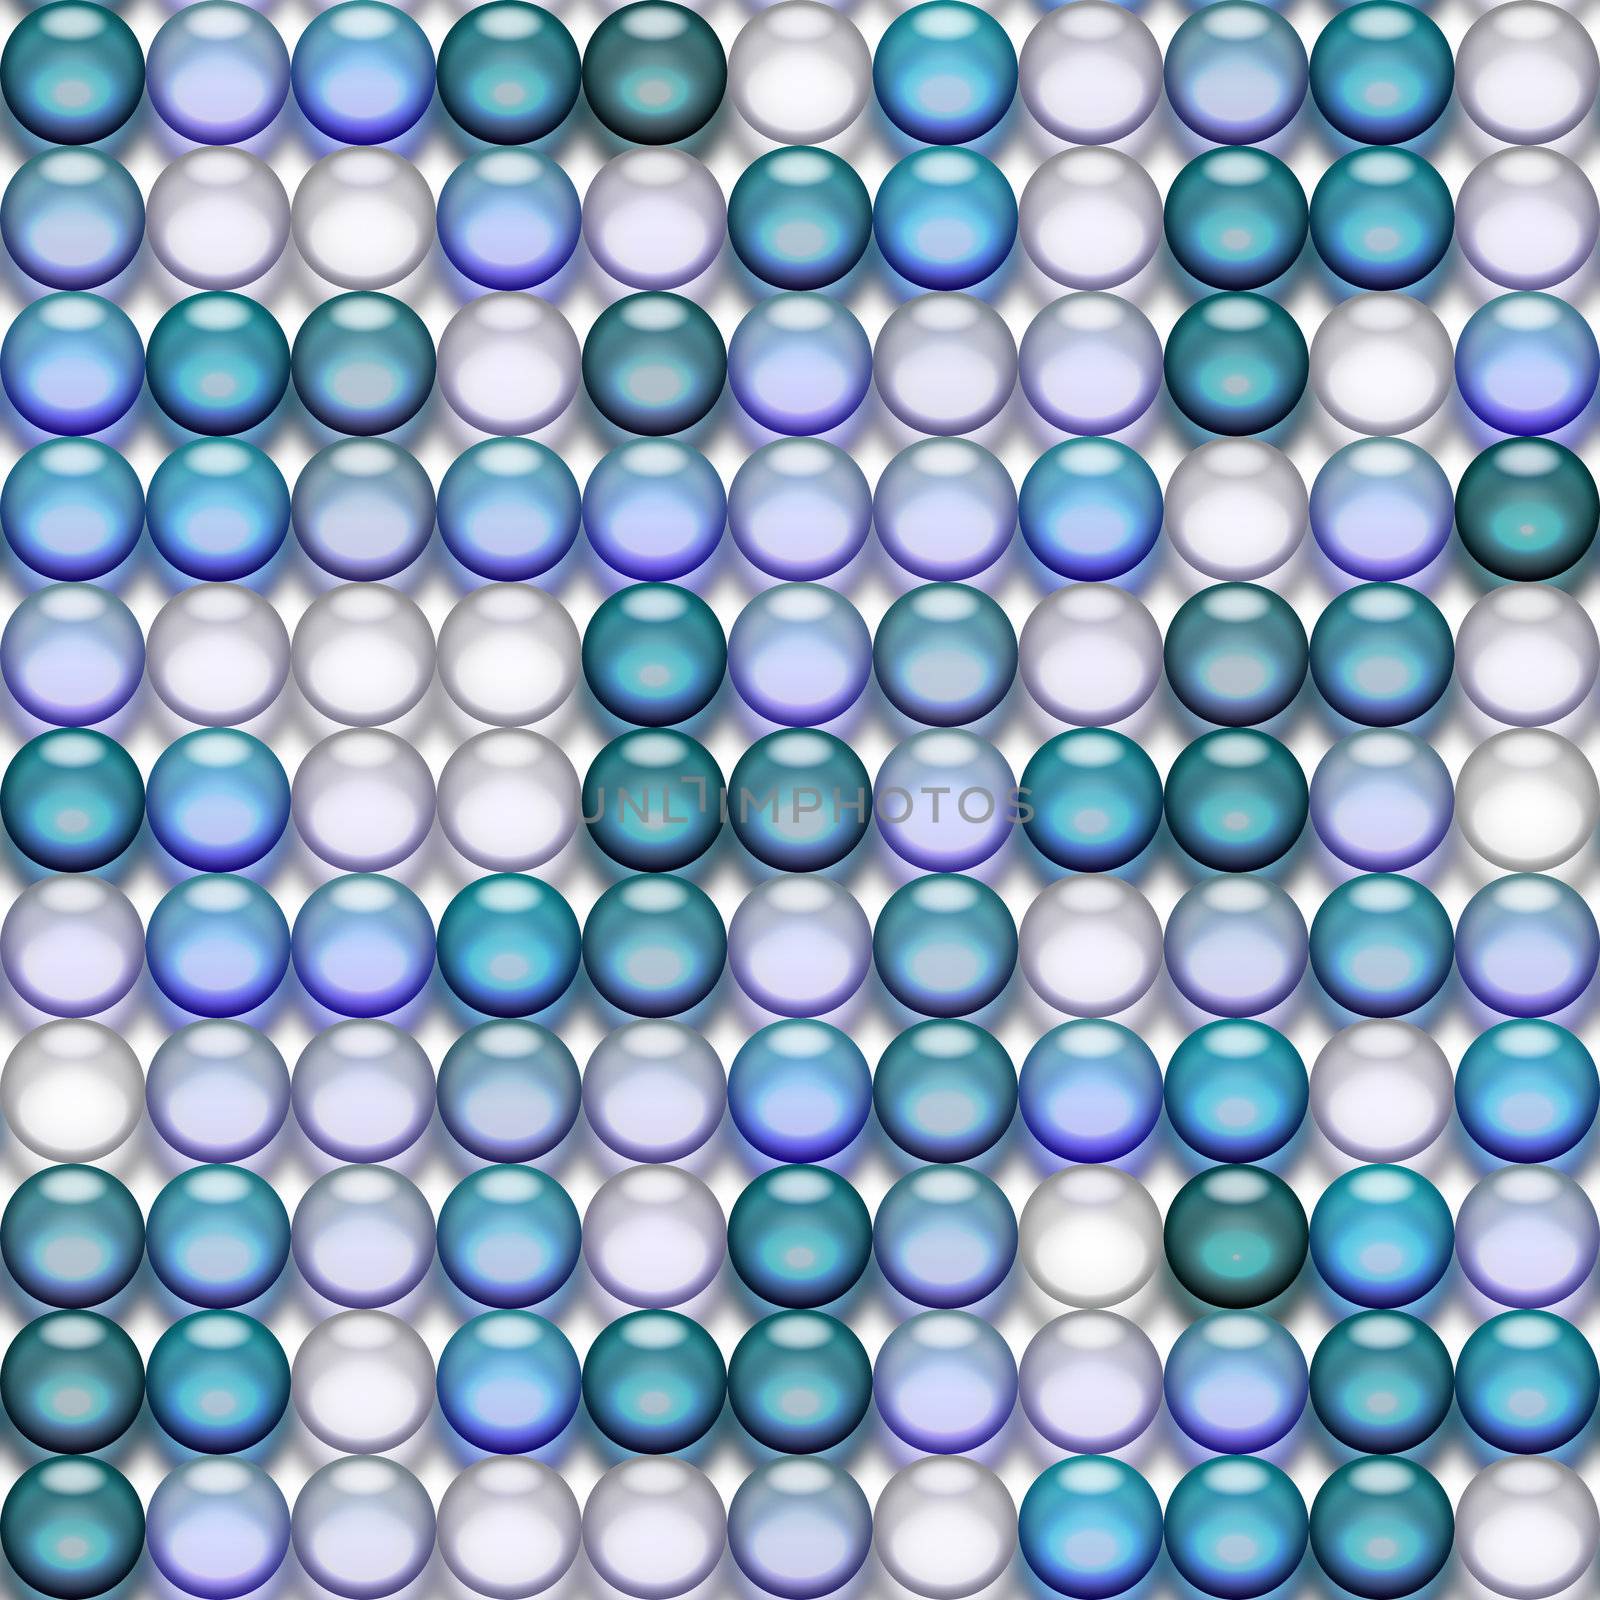 translucent marbles in pastel tones, will tile seamlessly as a pattern